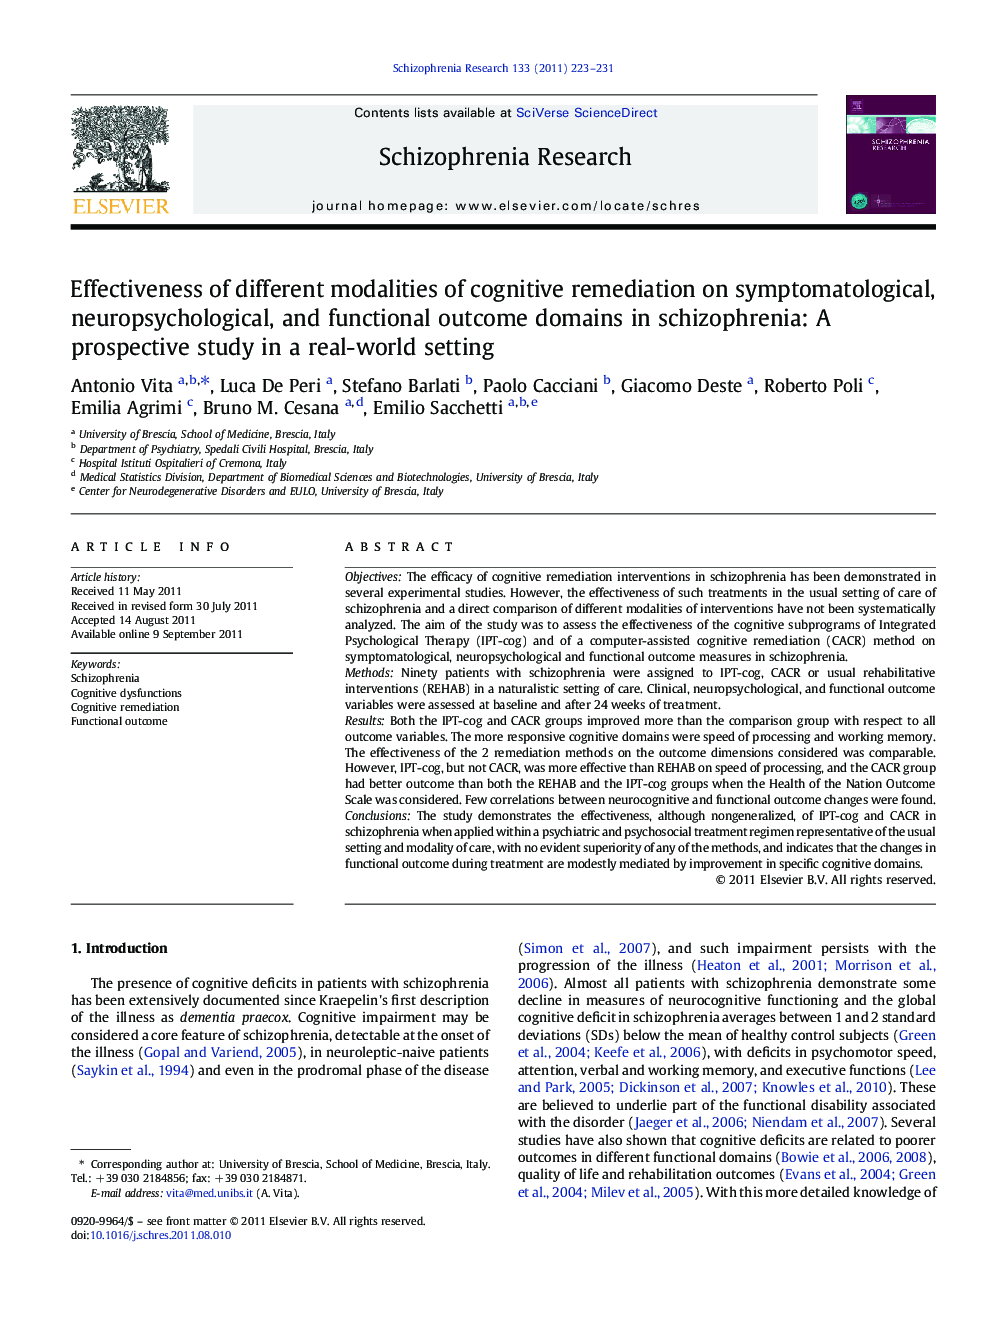 Effectiveness of different modalities of cognitive remediation on symptomatological, neuropsychological, and functional outcome domains in schizophrenia: A prospective study in a real-world setting